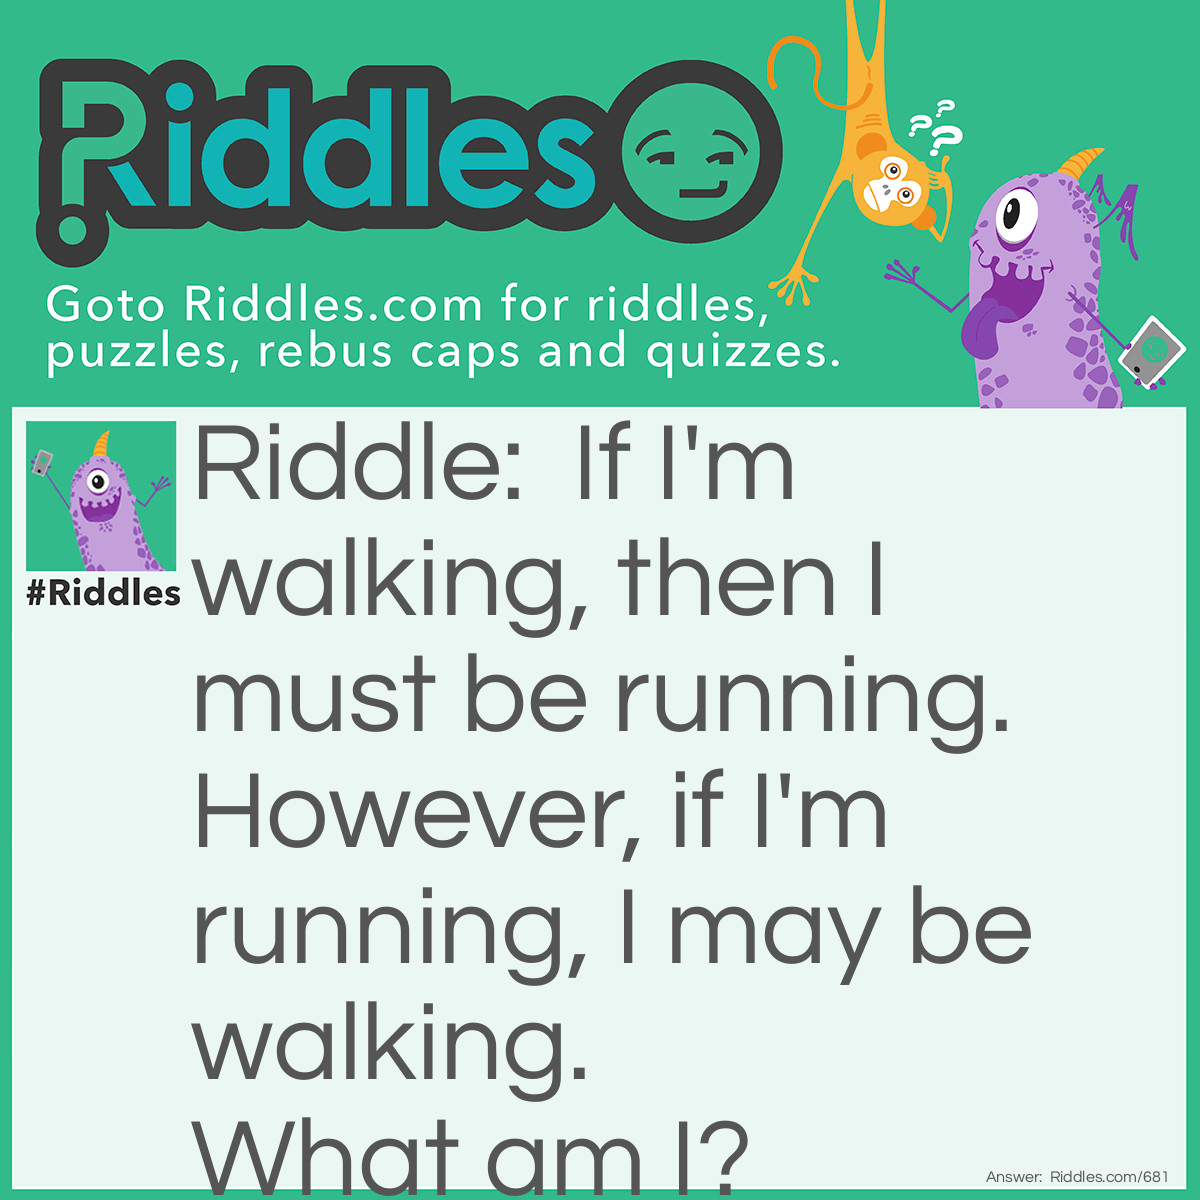 Riddle: If I'm walking, then I must be running. However, if I'm running, I may be walking.  
What am I? Answer: A Treadmill.